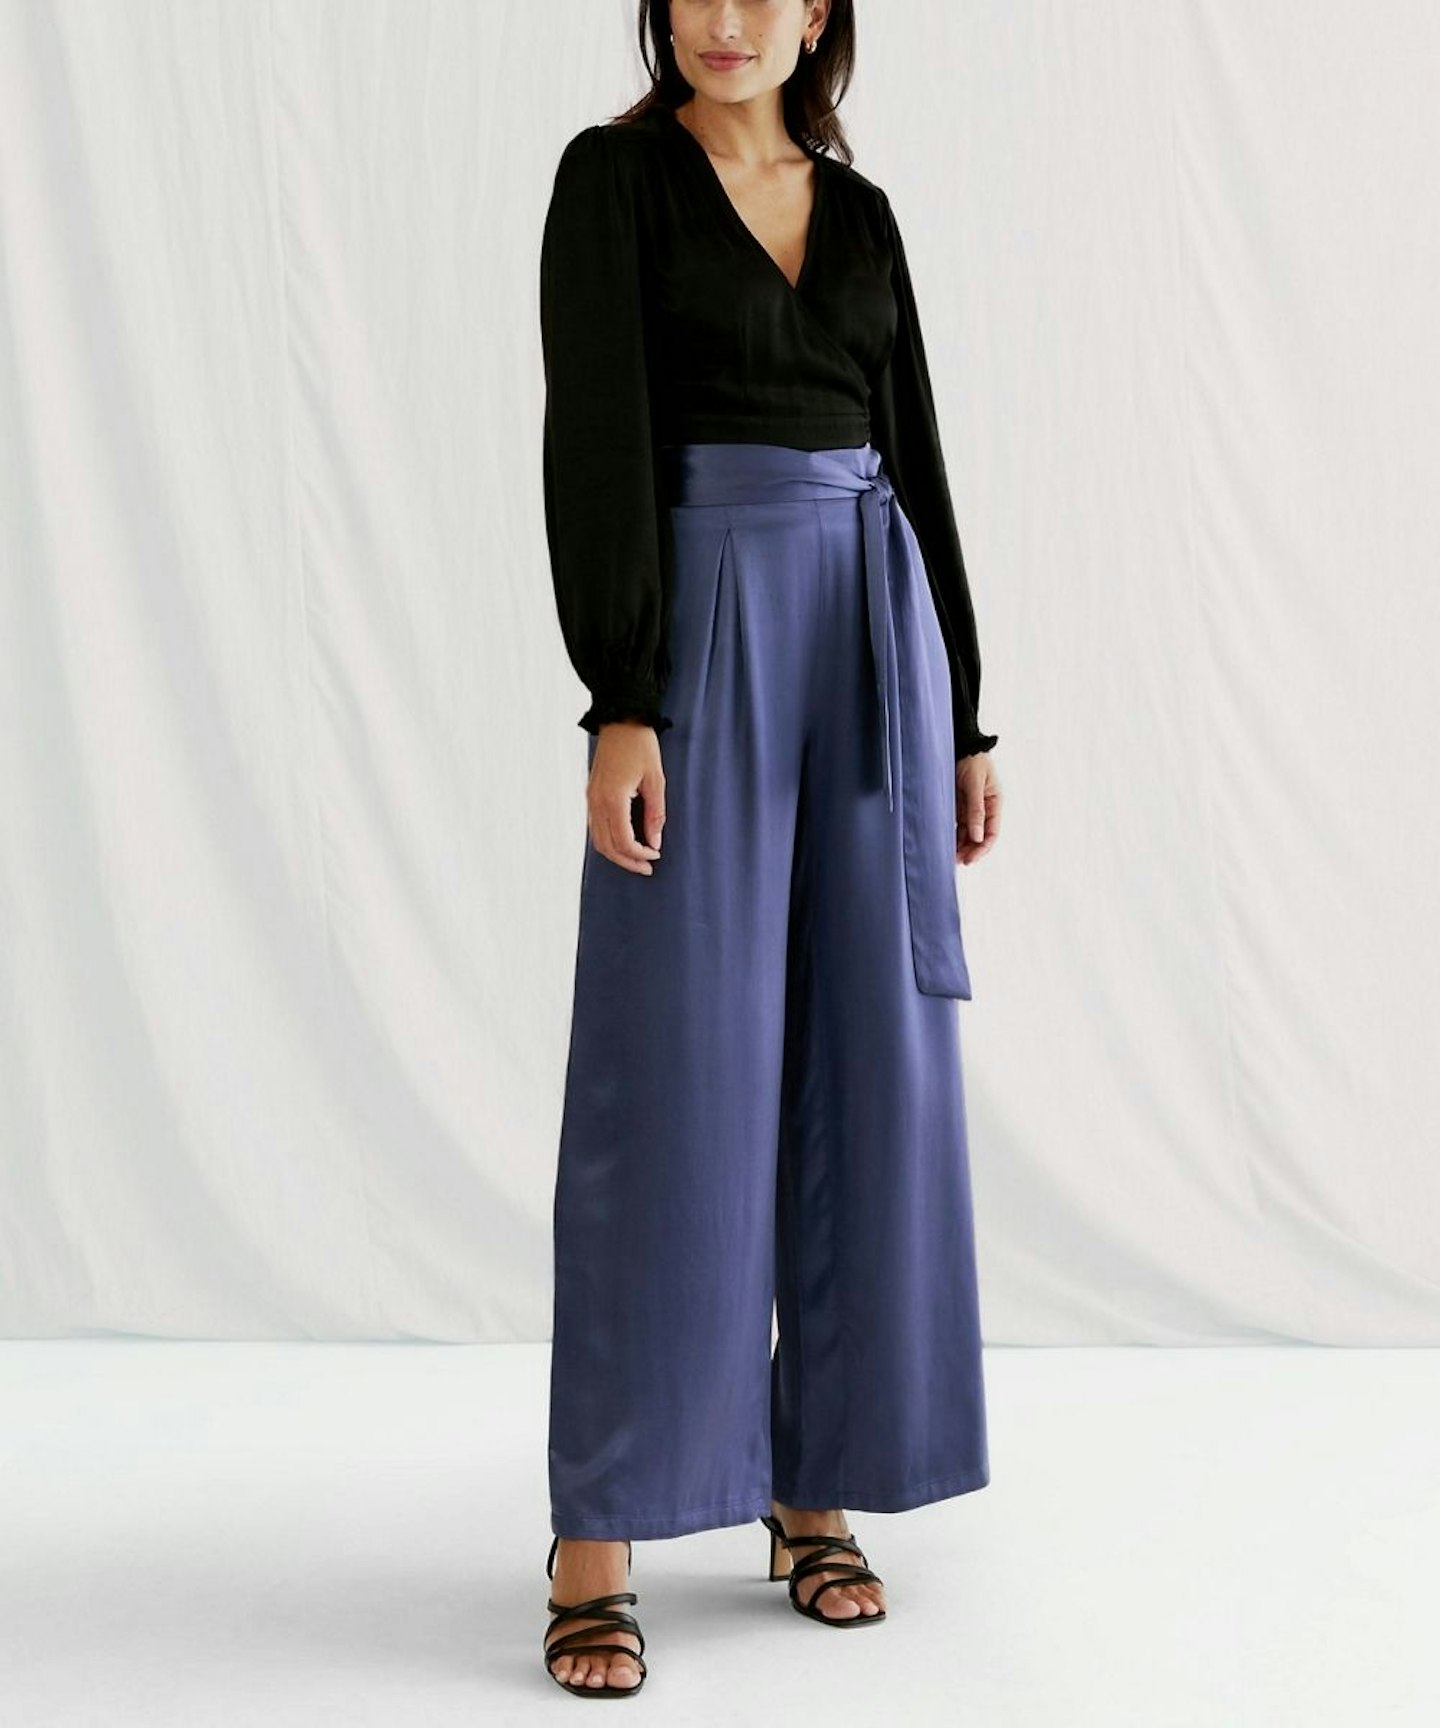 M&S X GHOST Satin Tie Front Wide Leg Trousers